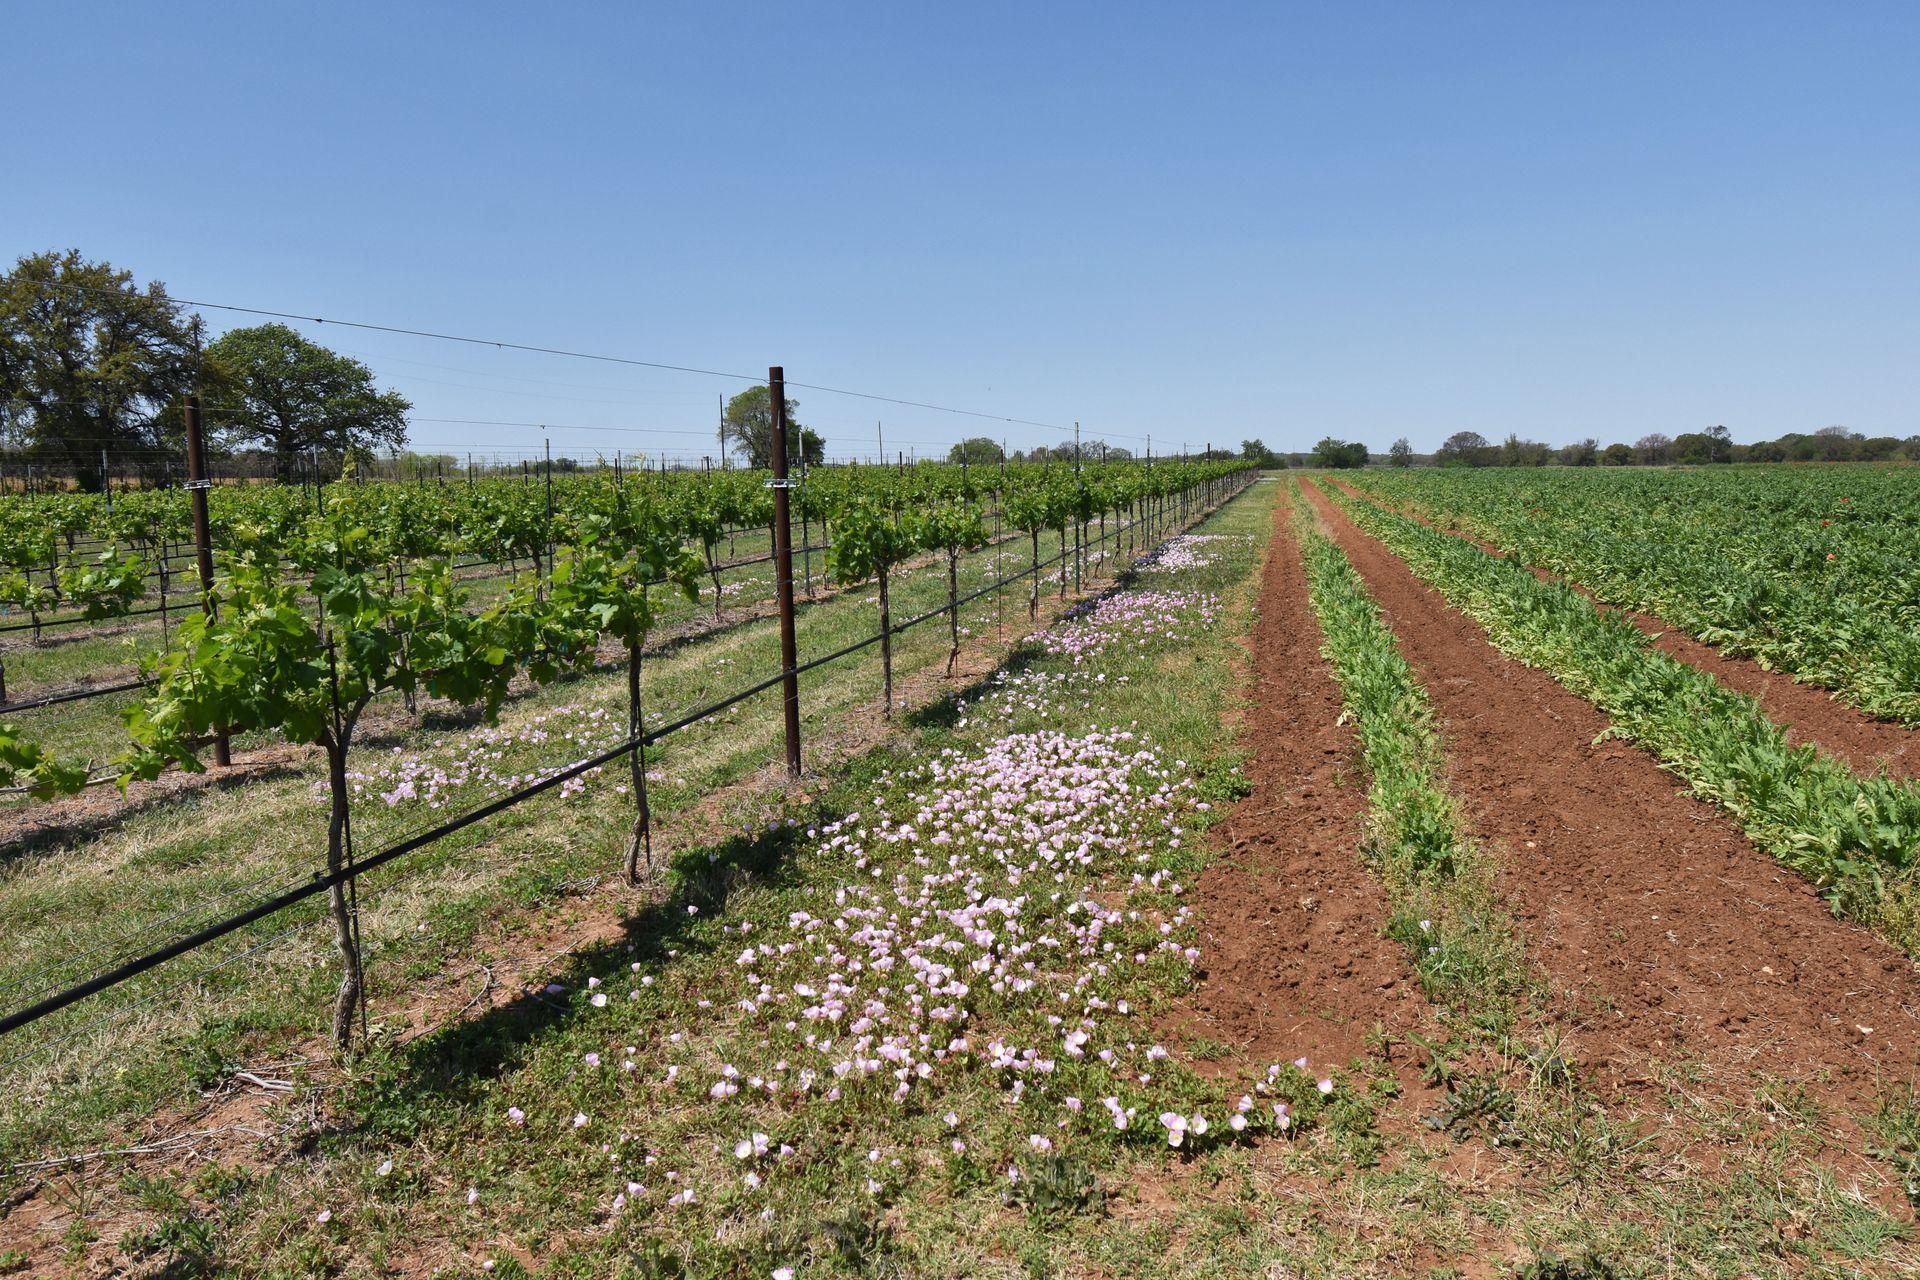 A view of grape growing in the vineyards at Becker Vineyards. There are some pink flowers between the rows of plants.